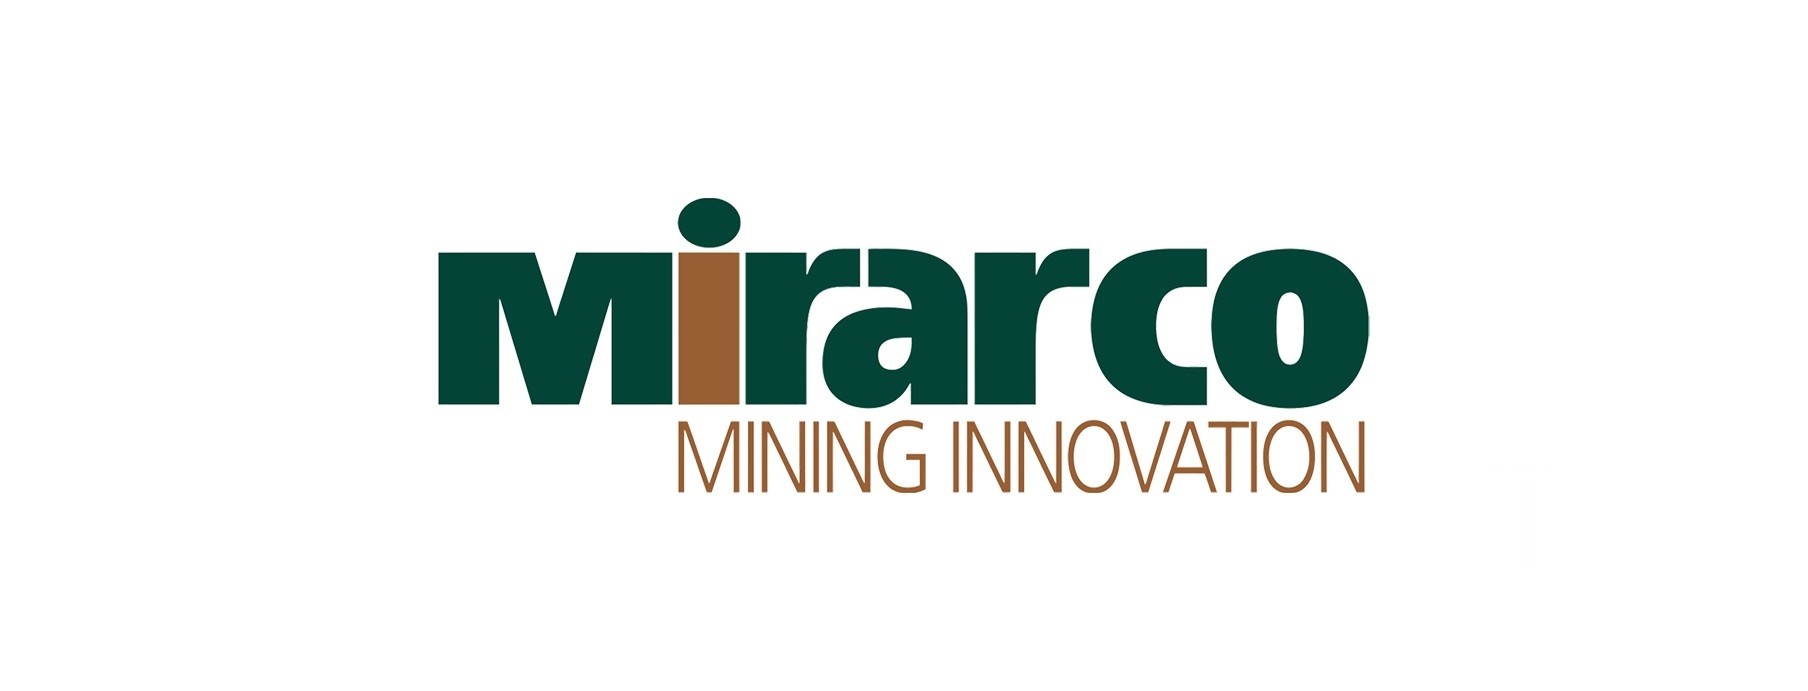 Mining Innovation Rehabilitation and Applied Research Corporation 